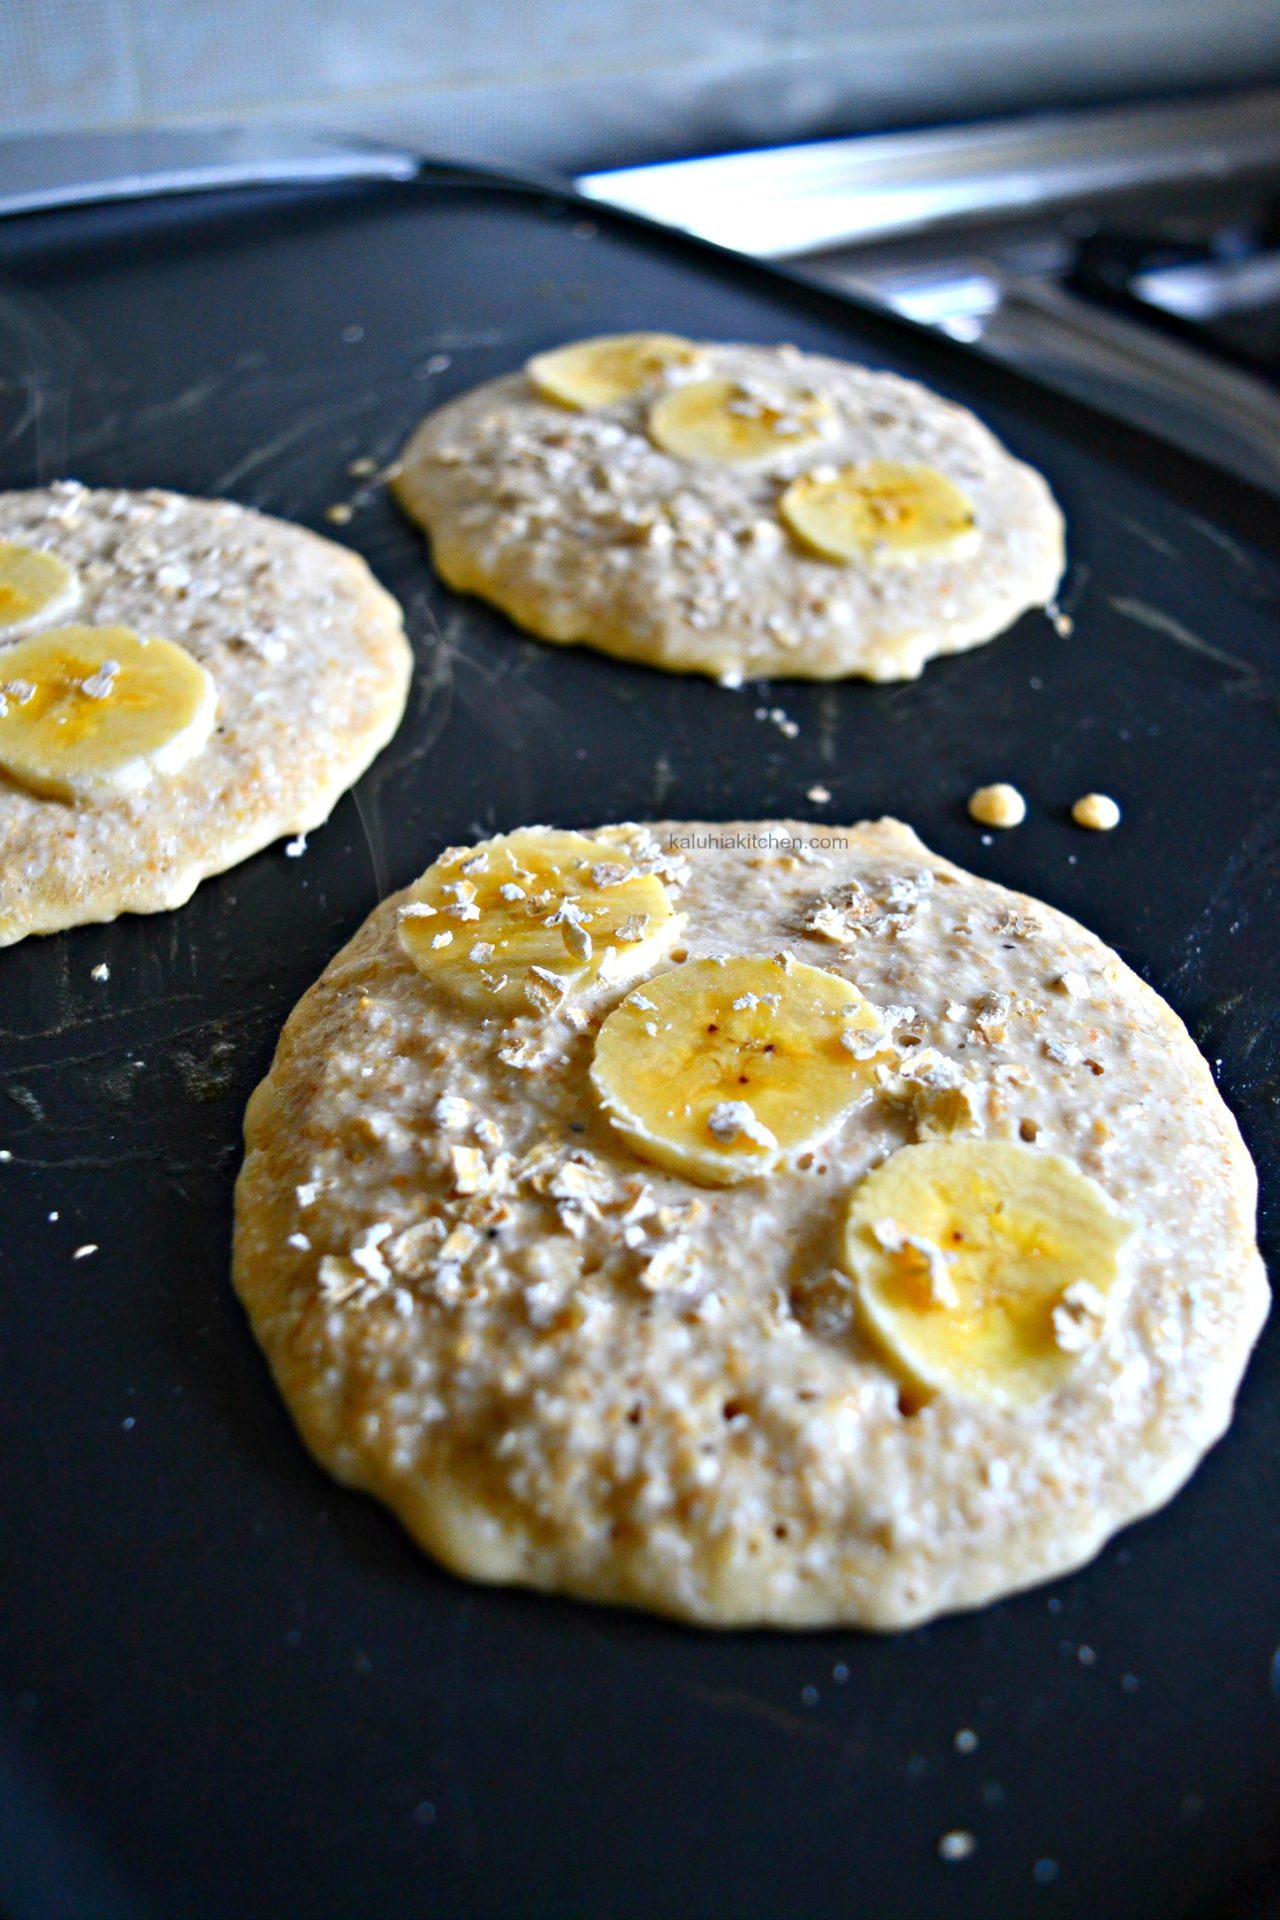 add the bananas on the unset side of the oat pancakes together with some raw oats just for texture_kaluhiskitchen.com